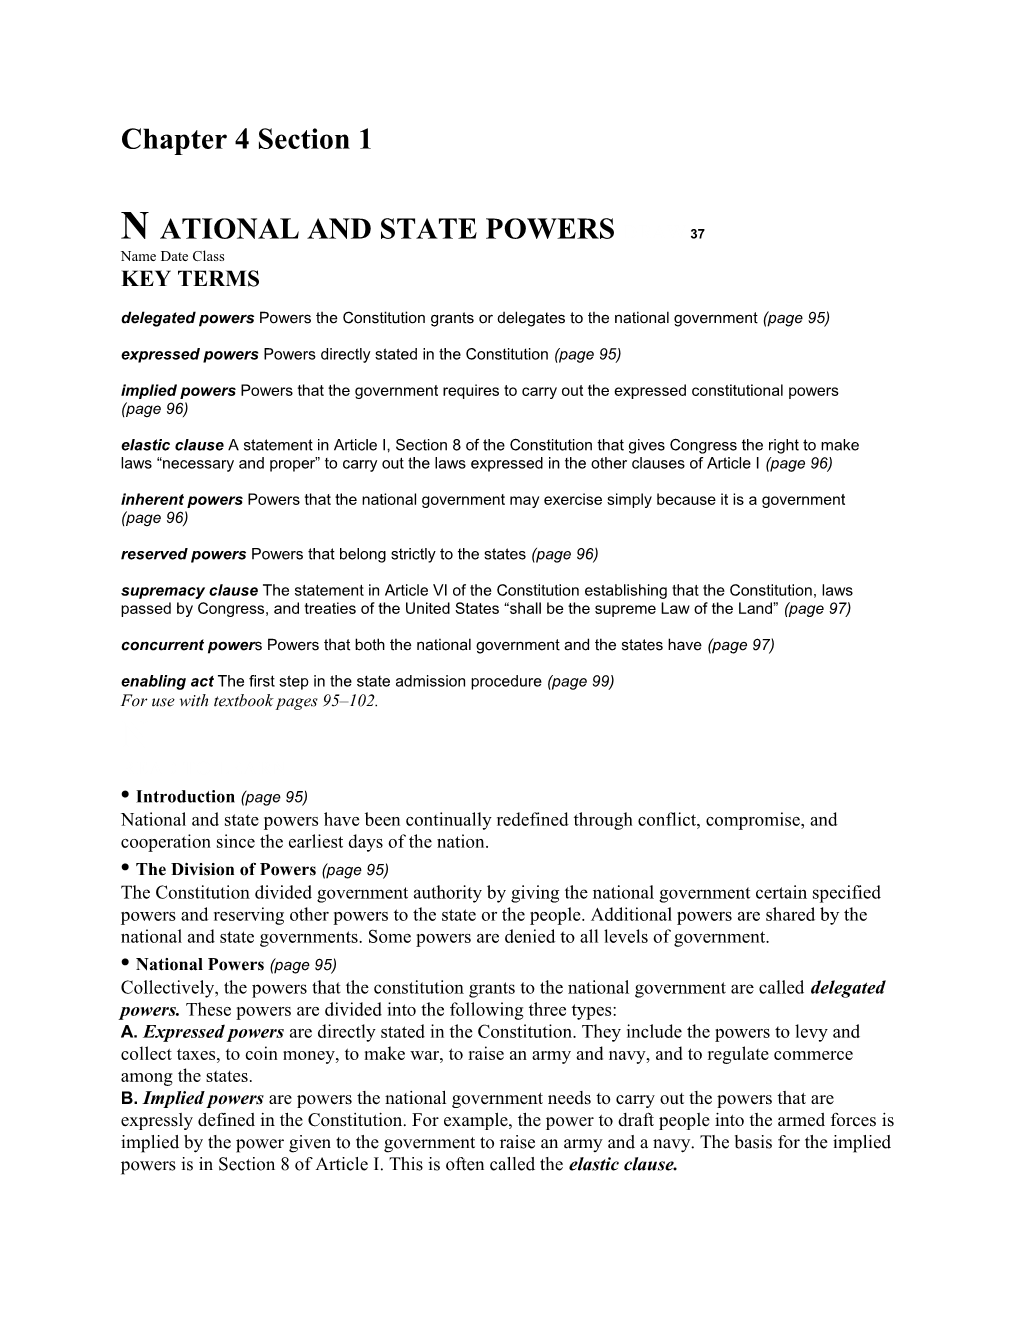 N Ational and State Powers Draw37